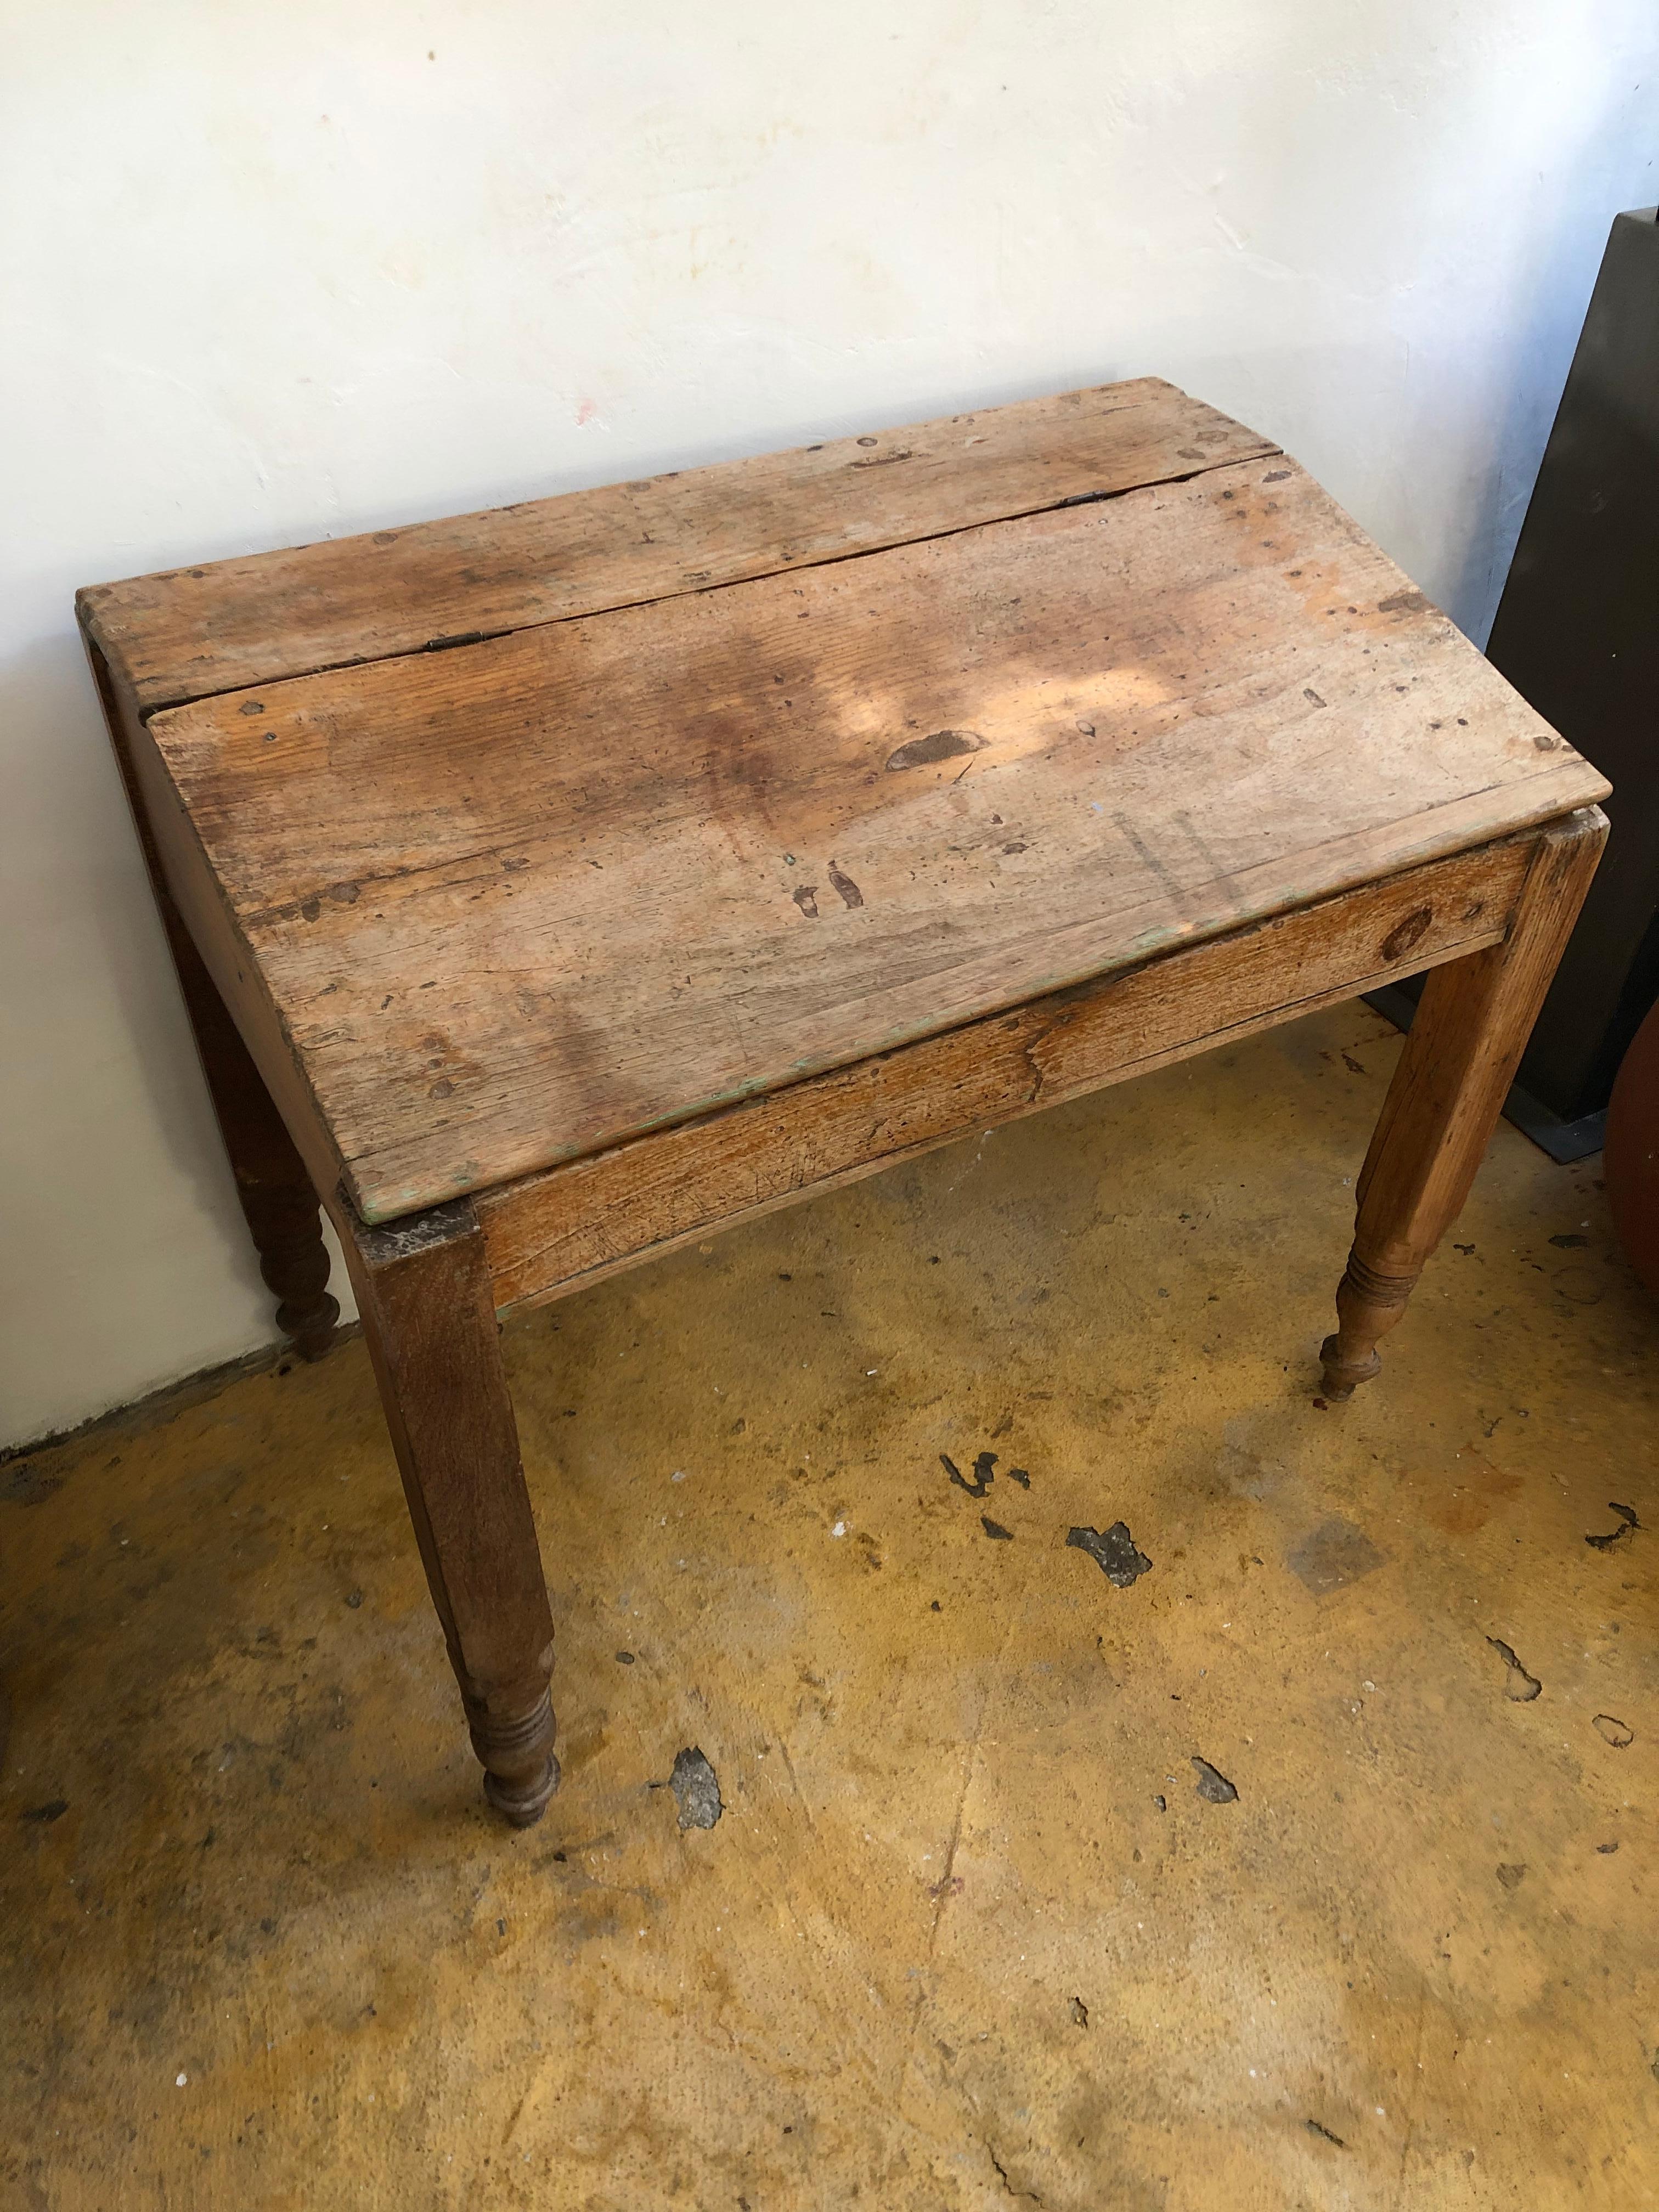 This is a unique antique school desk found in western México.
The patina of this piece, makes it perfect for decorating a contemporary space.